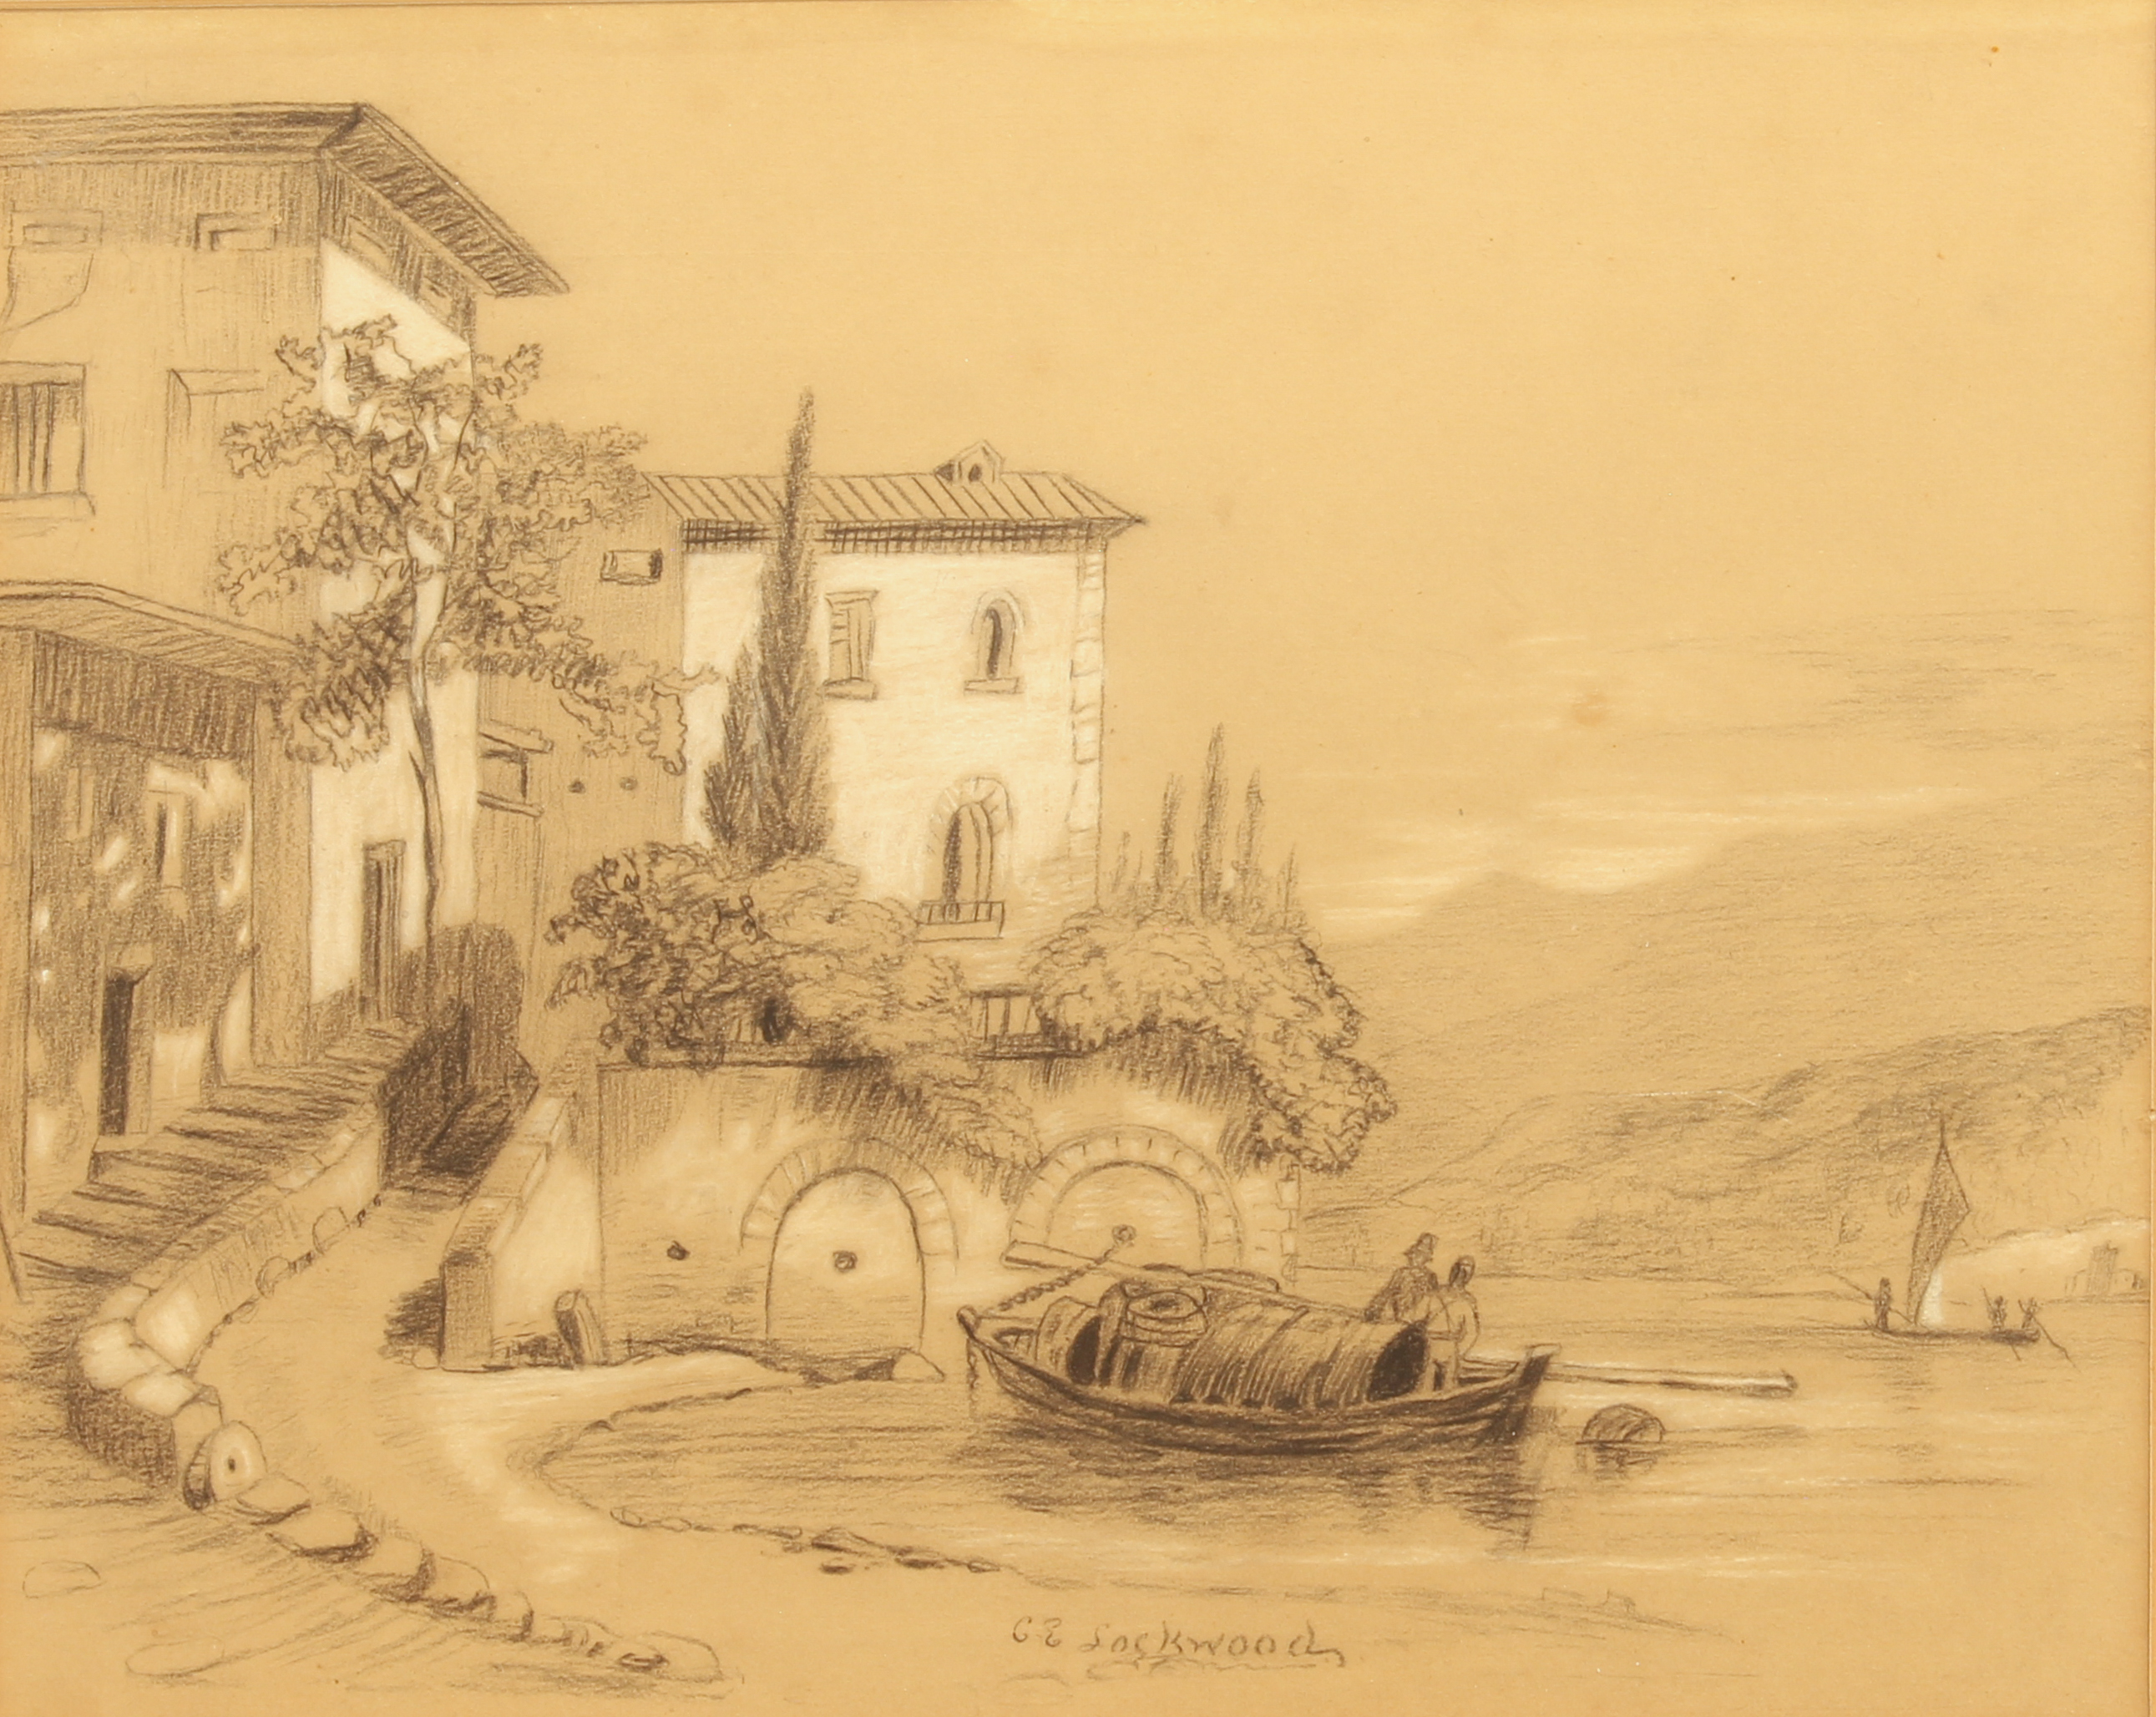 J. H. Lockwood (British, second half 19th century) 'Near Montpellier' charcoal and white chalk on